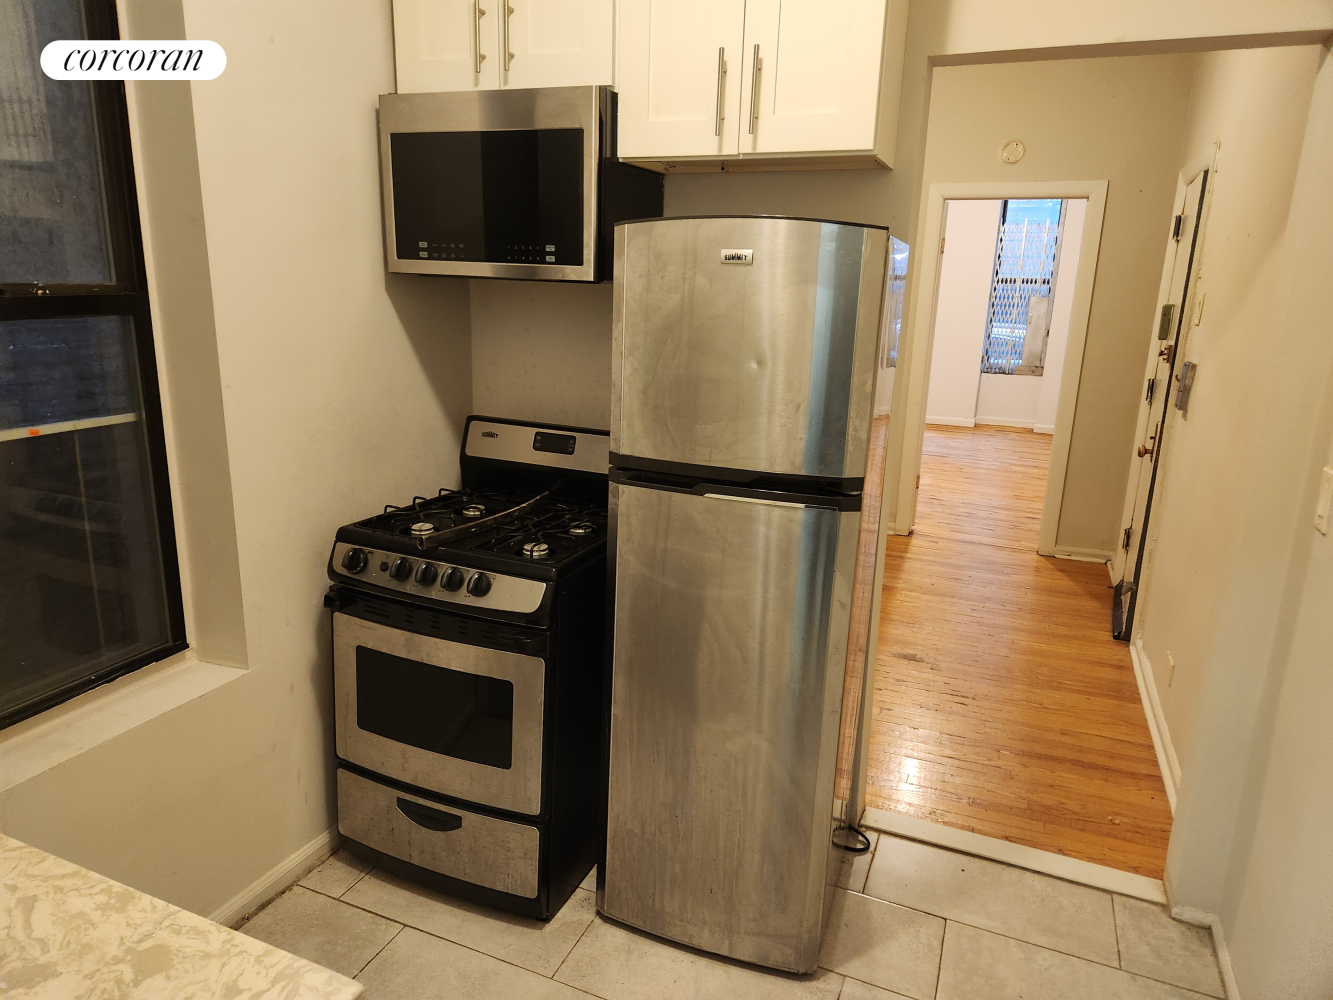 269 West 146th Street 4A, Central Harlem, Upper Manhattan, NYC - 1 Bedrooms  
1 Bathrooms  
3 Rooms - 